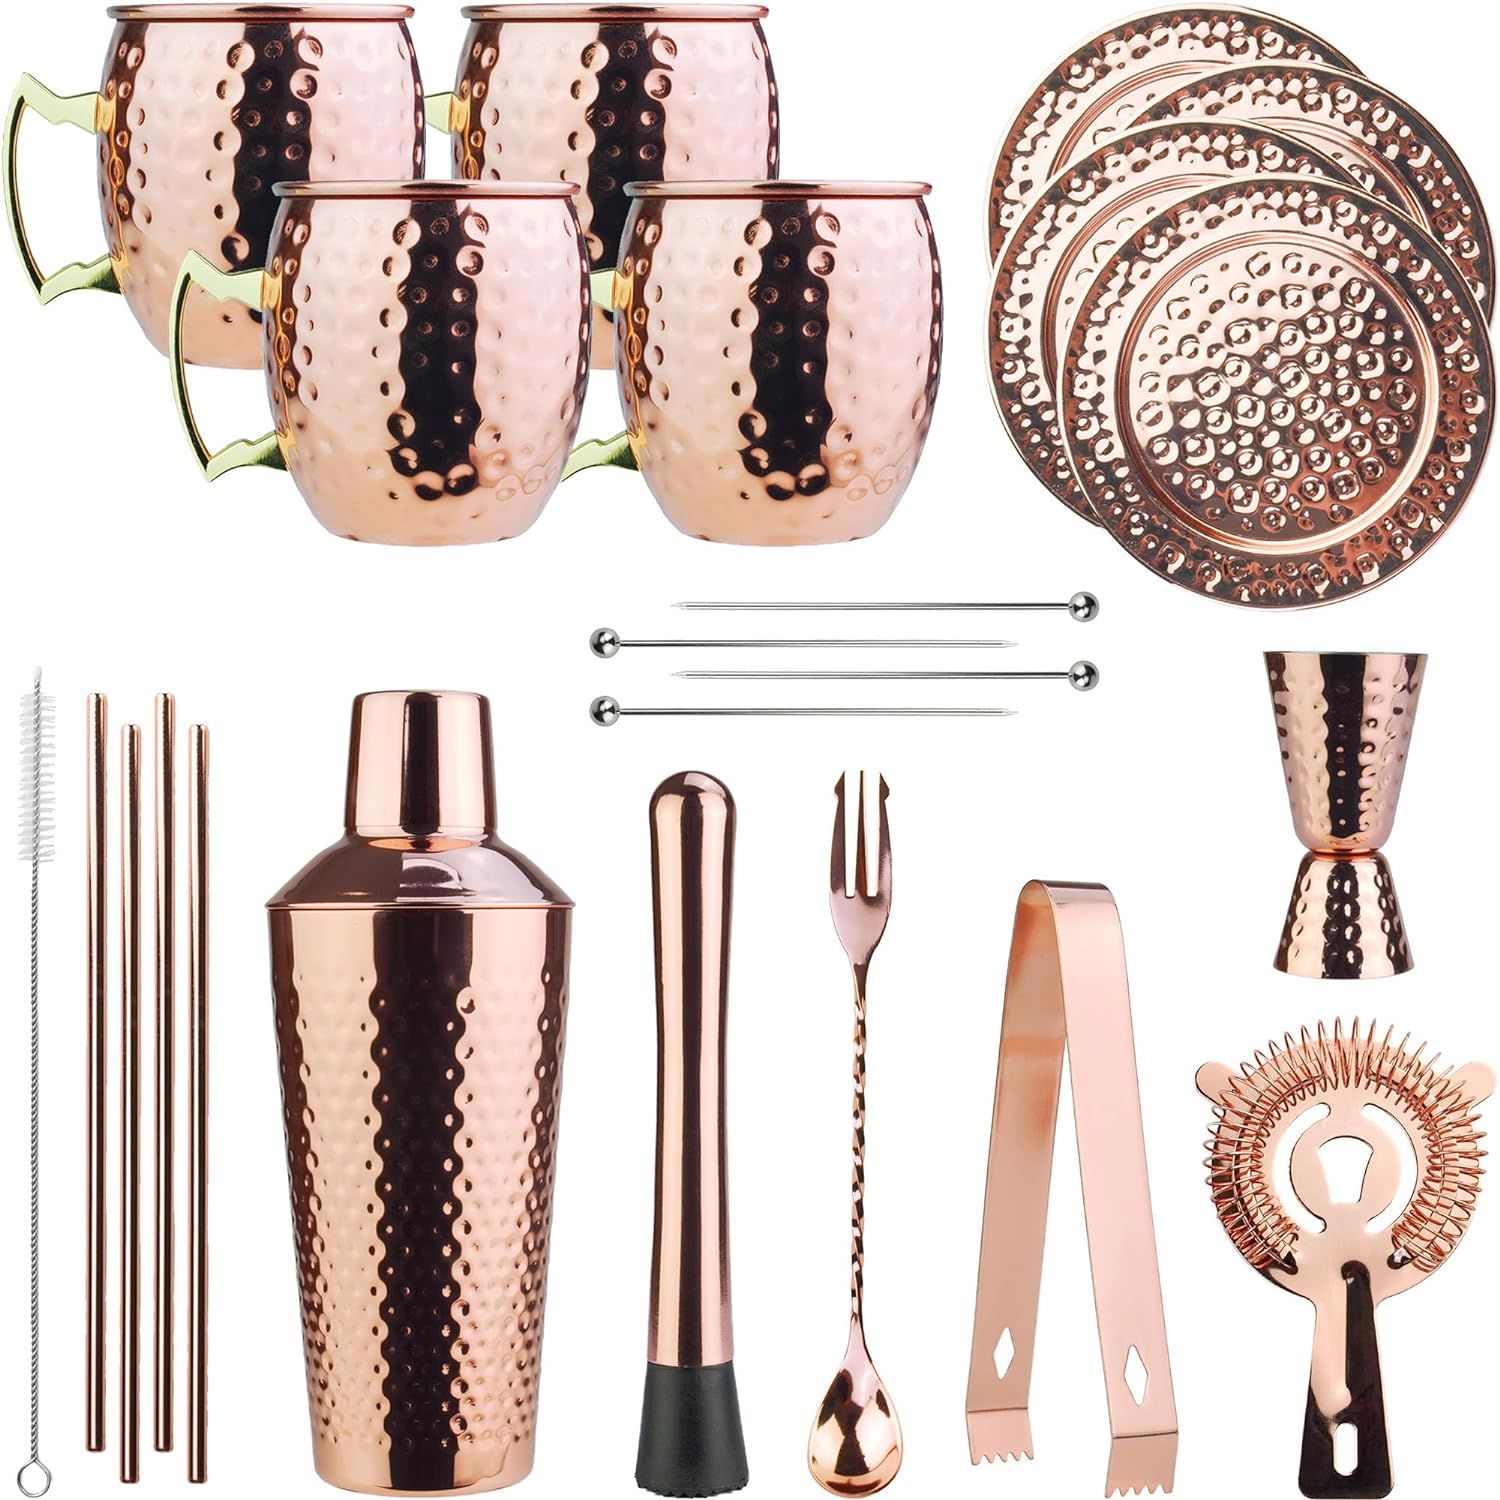 Moscow Mule Barware Set - 23pc - Copper Plated Stainless Steel - Professional Bar Tools for Drink... | Amazon (US)